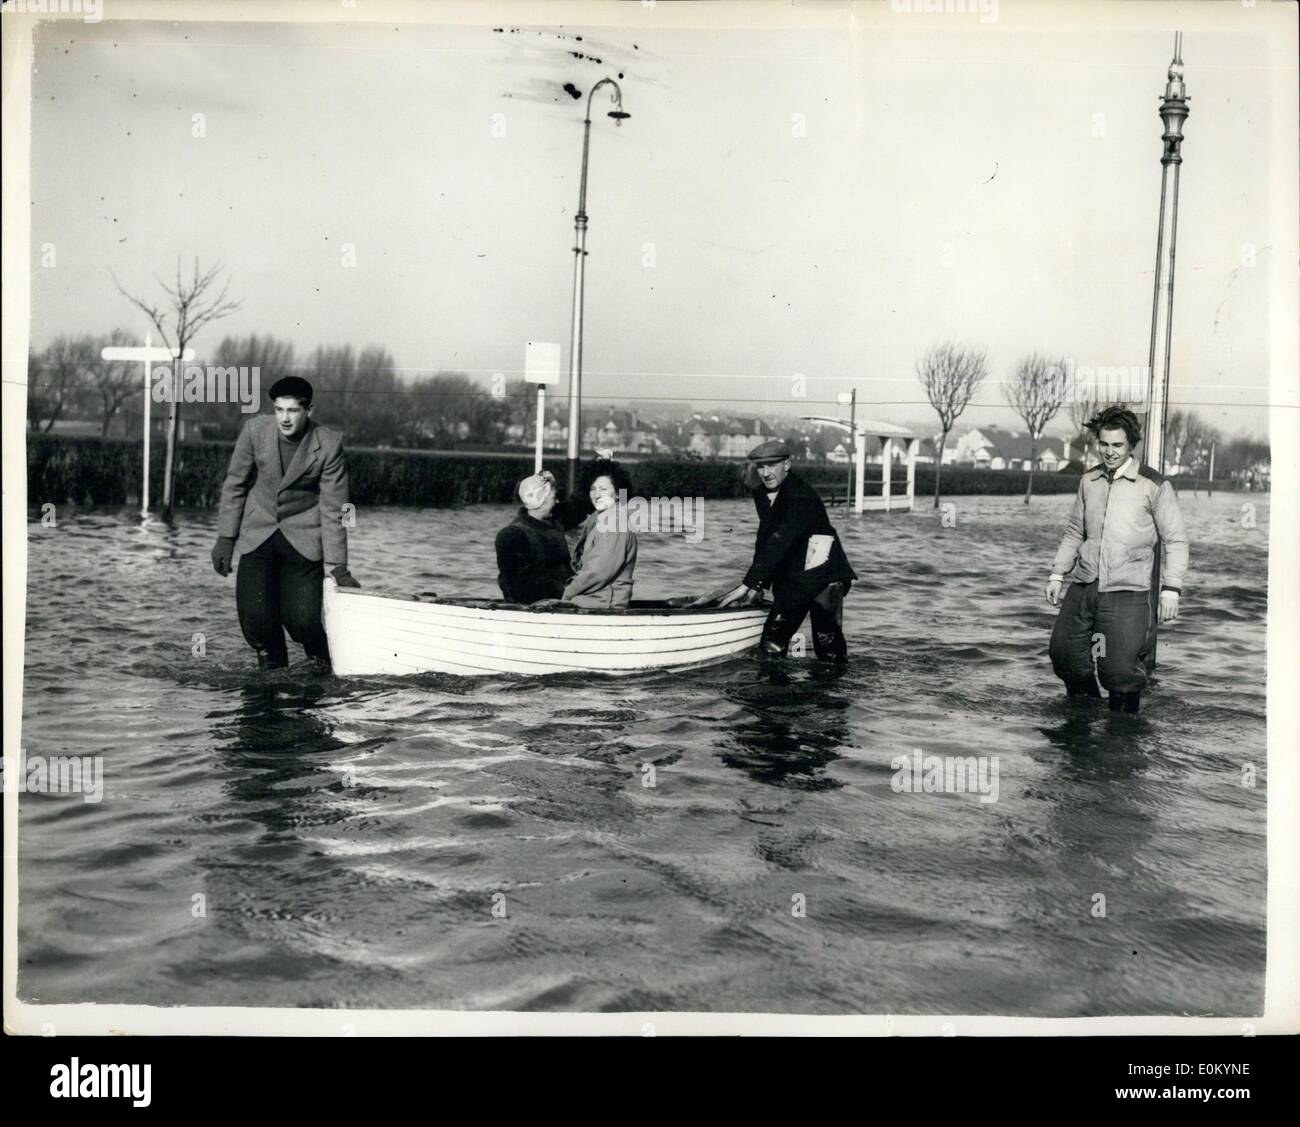 Feb. 02, 1953 - FLOOD DAMAGE AT SOUTHEND. HOTO SHOWS:- Boats were used in the flooded streets of Southend today - wher Stock Photo